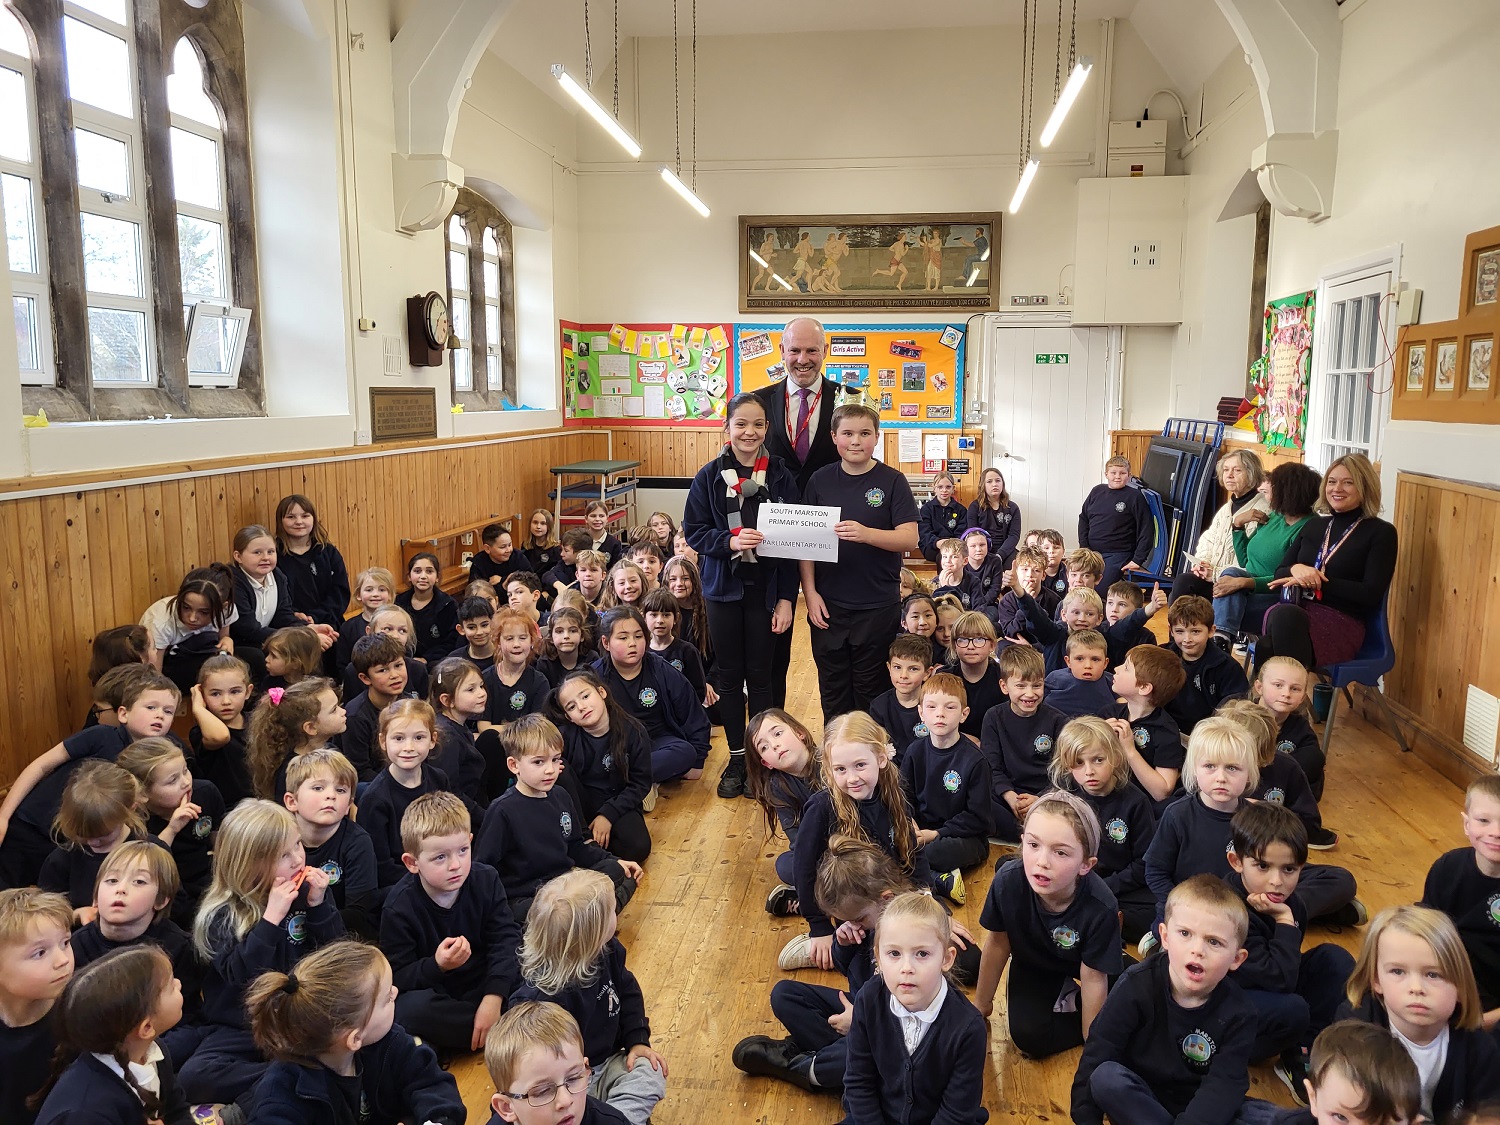 Justin Visits South Marston Primary School